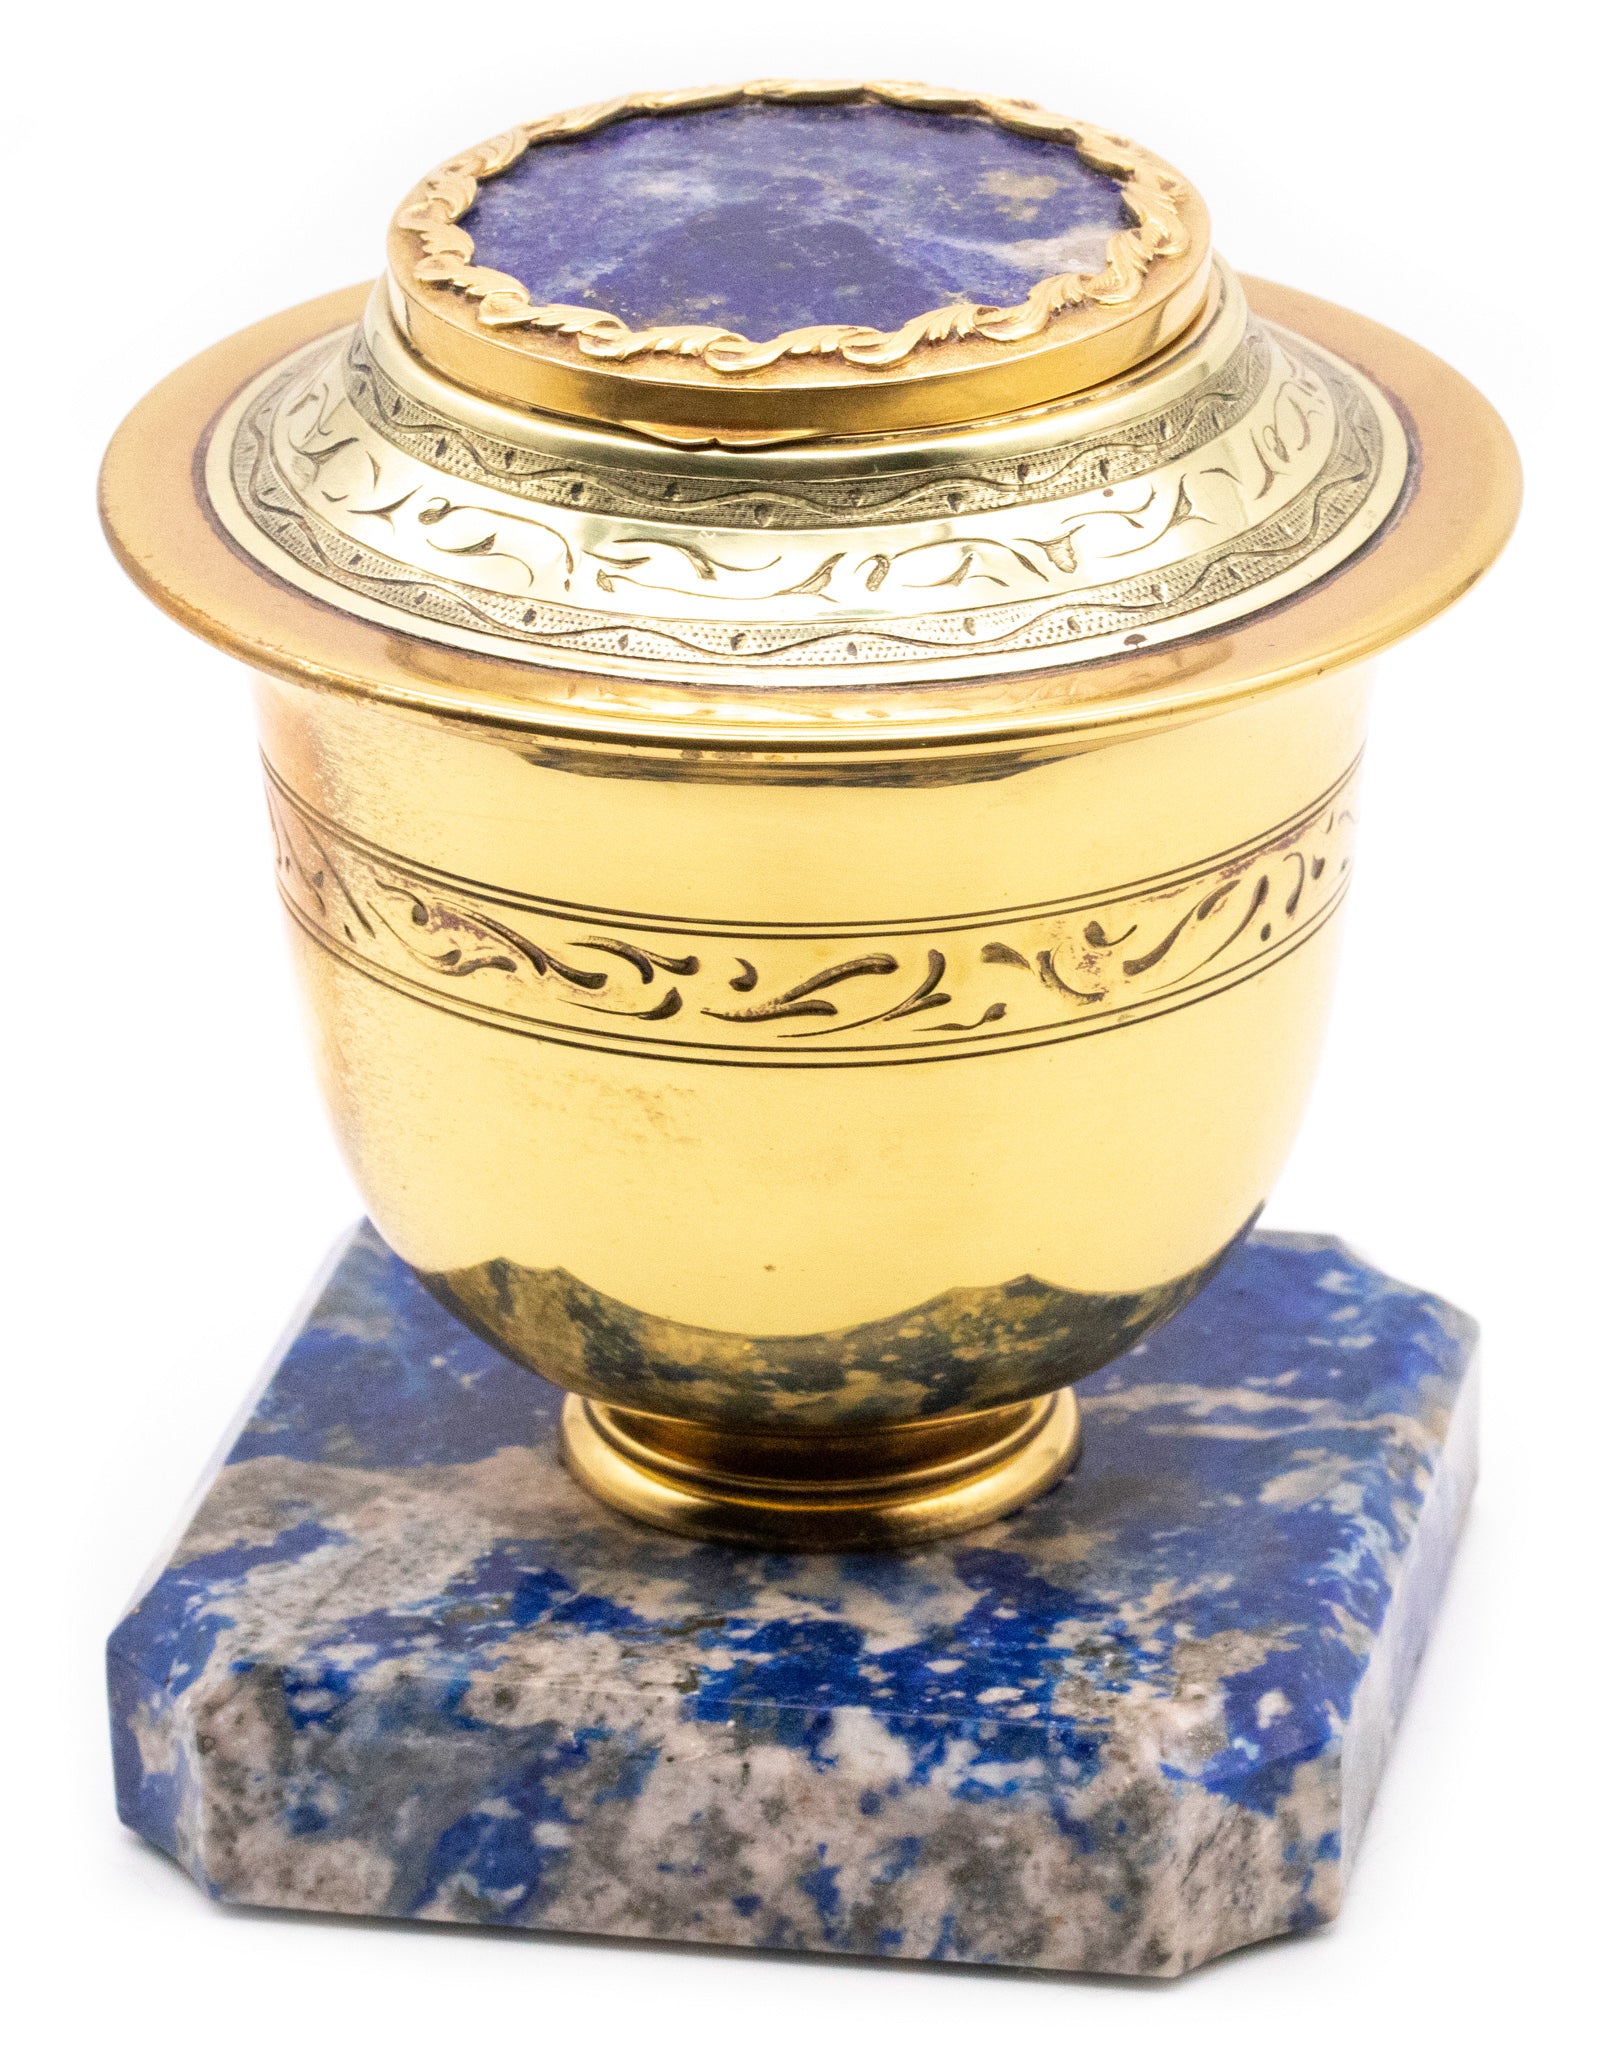 FRANCE THIRD EMPIRE 1870 INKWELL 18 KT GOLD, GILDED STERLING, LAPIS & BLUE MARBLE